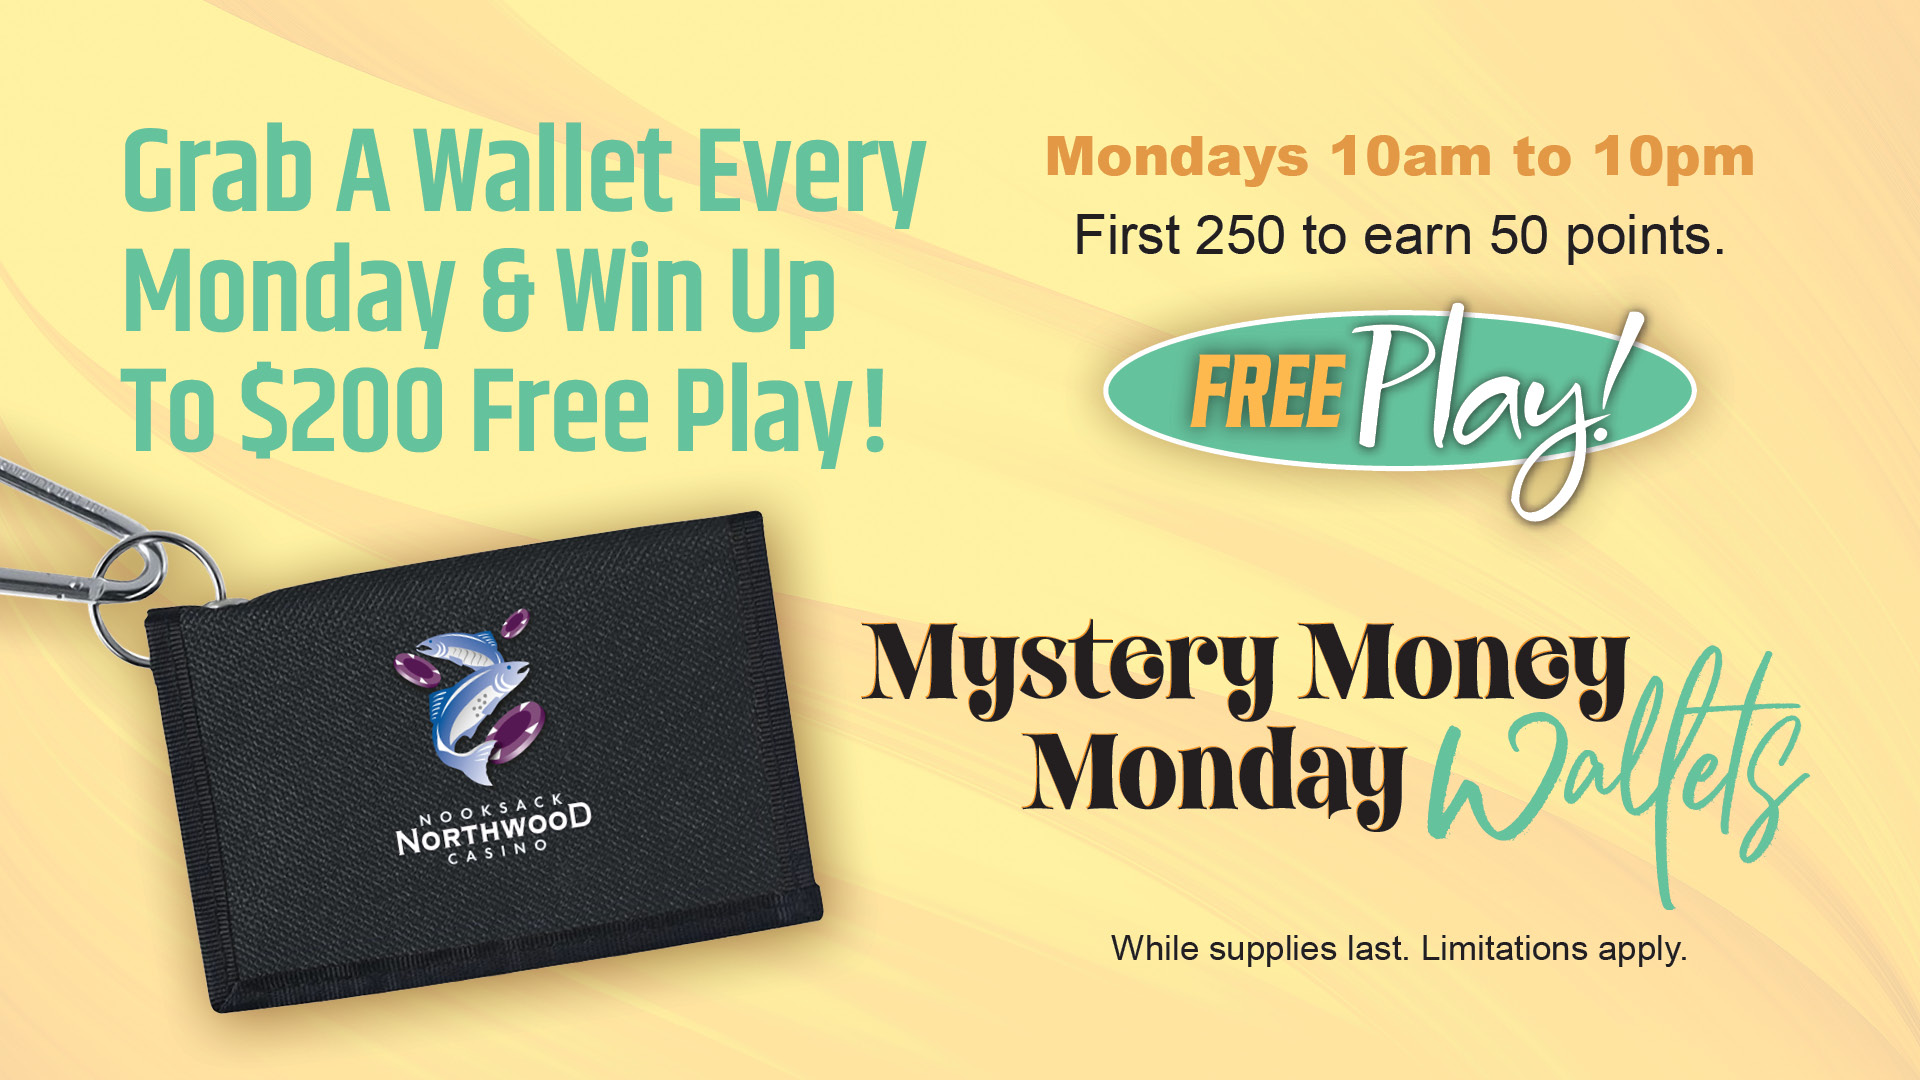 Wallets with free play on Mondays